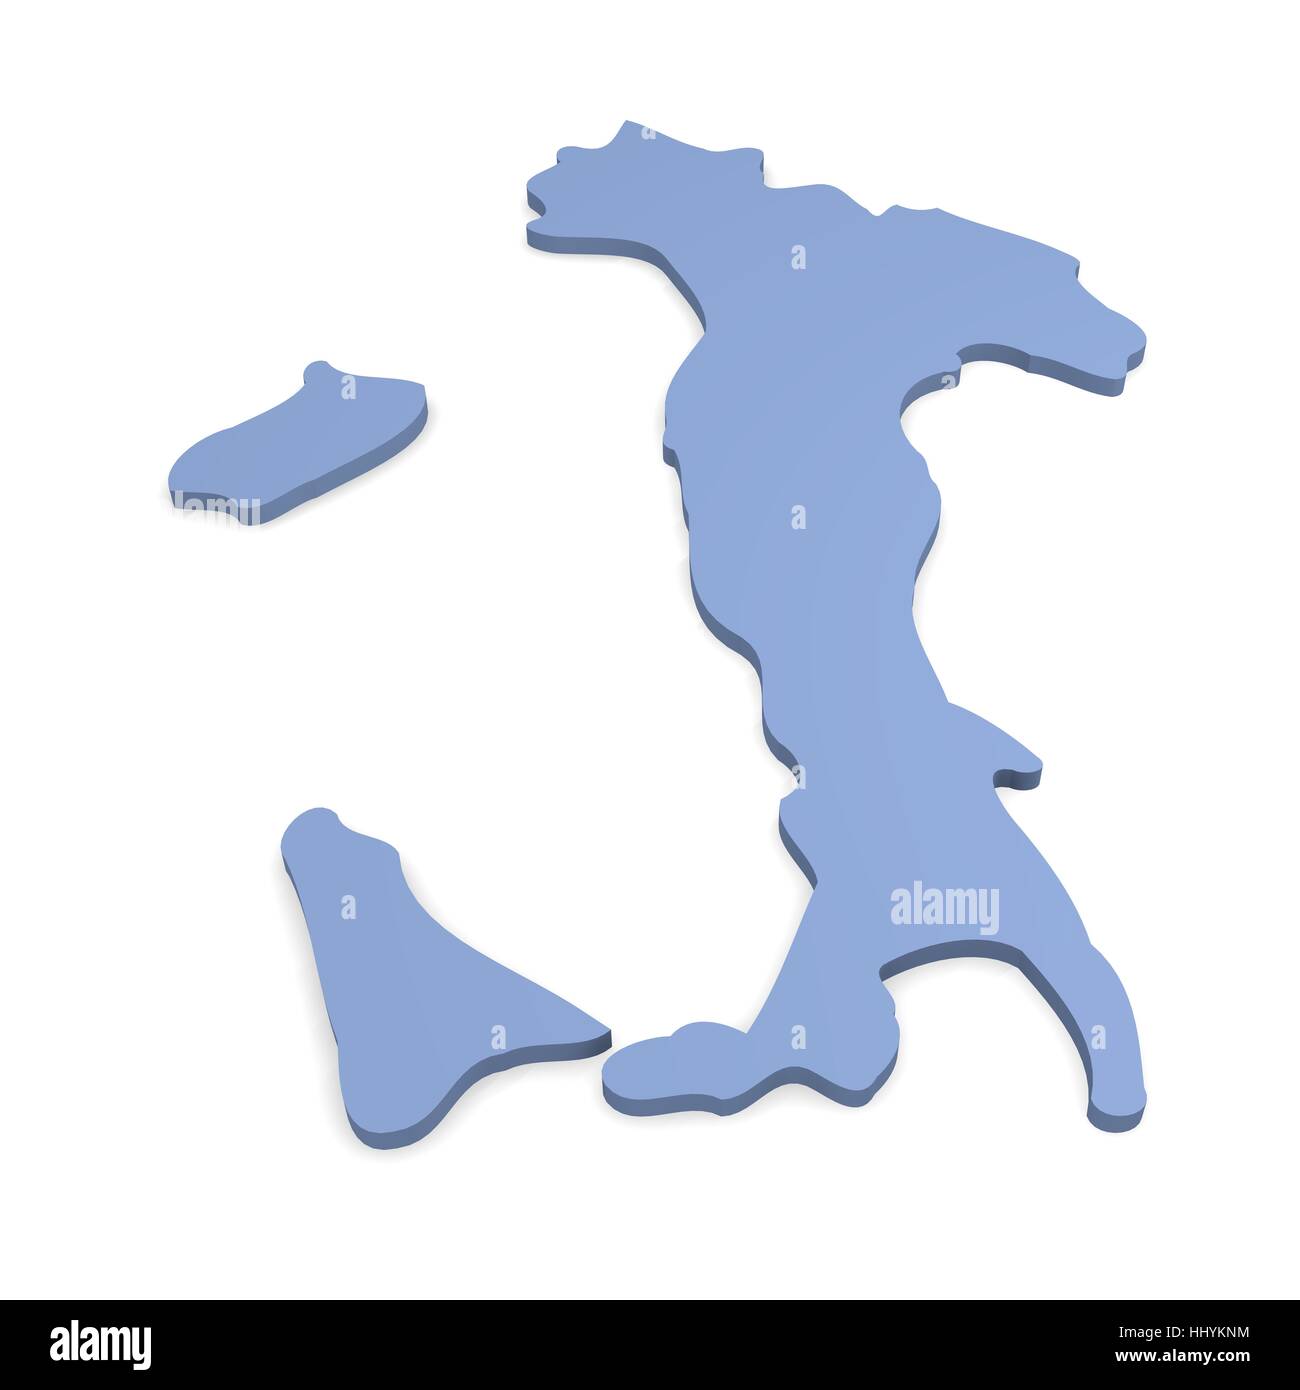 3d map of italy Stock Photo